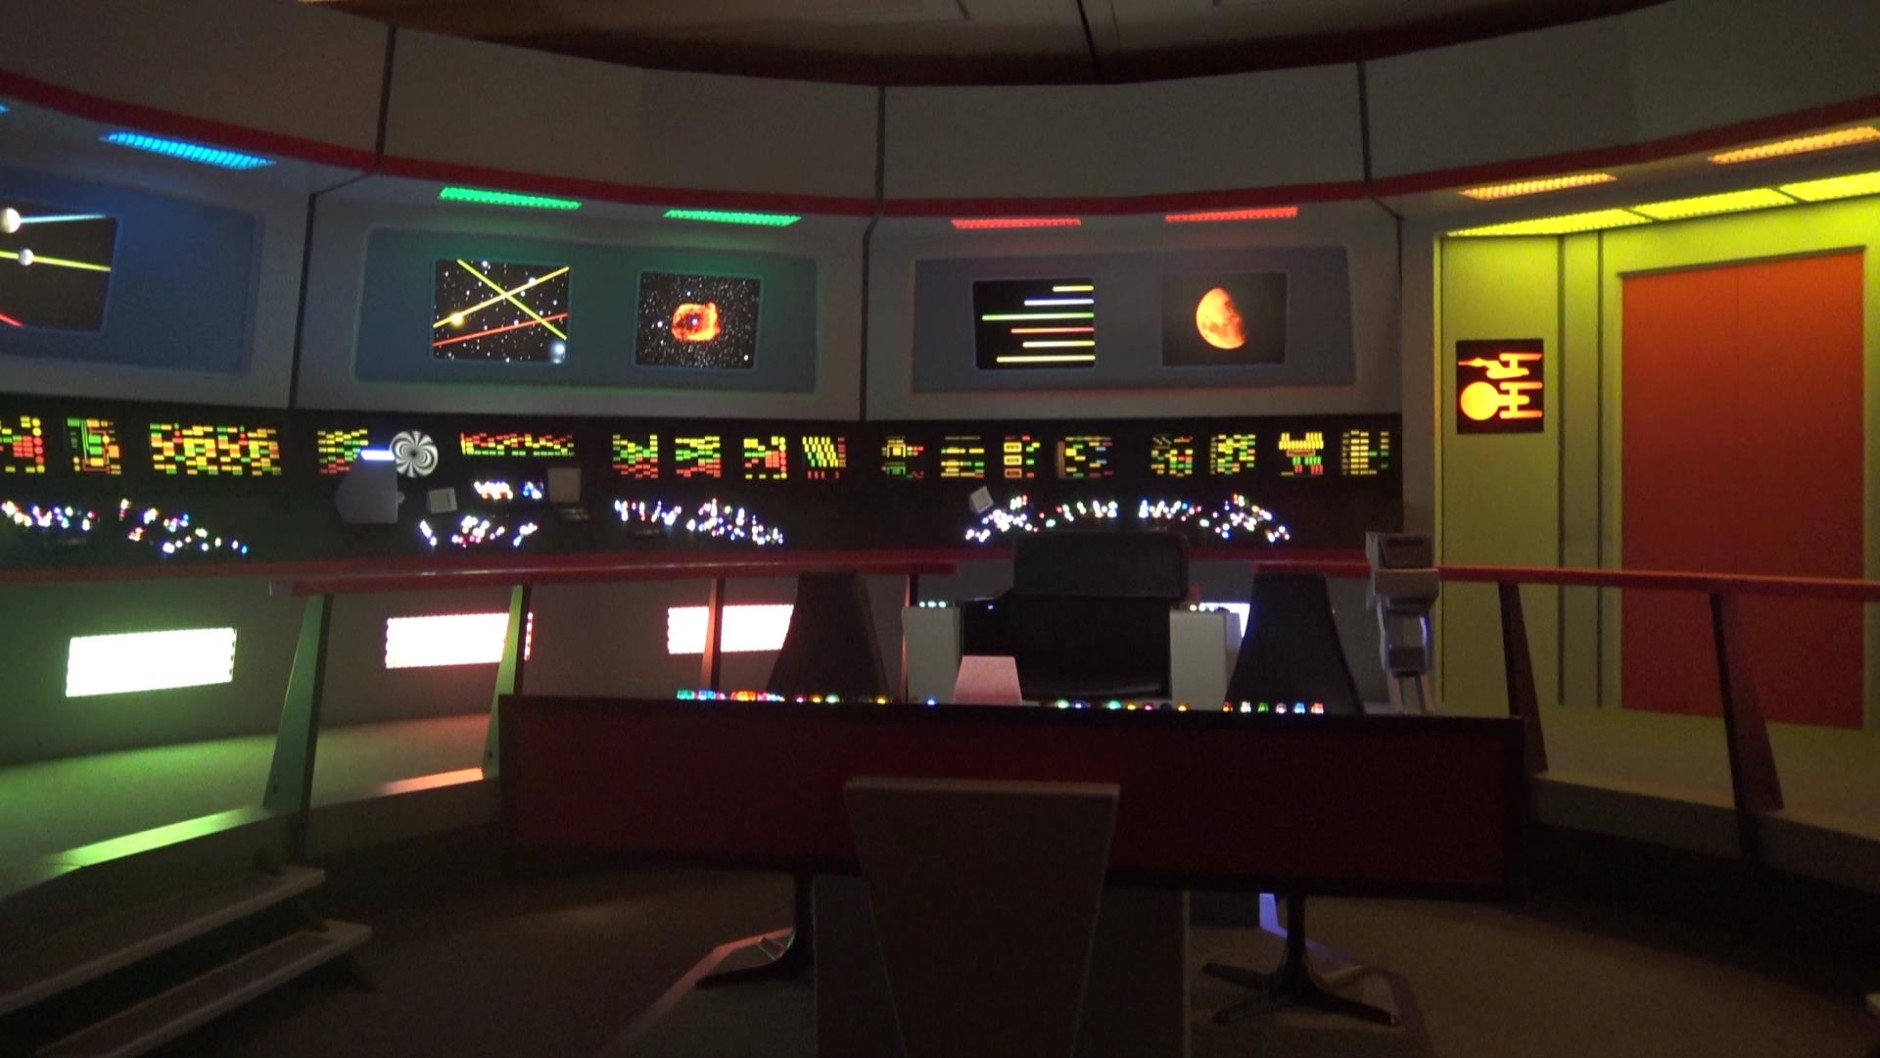 The bridge of the "Original Series Enterprise" at the Star Trek Convention. (WTOP/Kenny Fried)